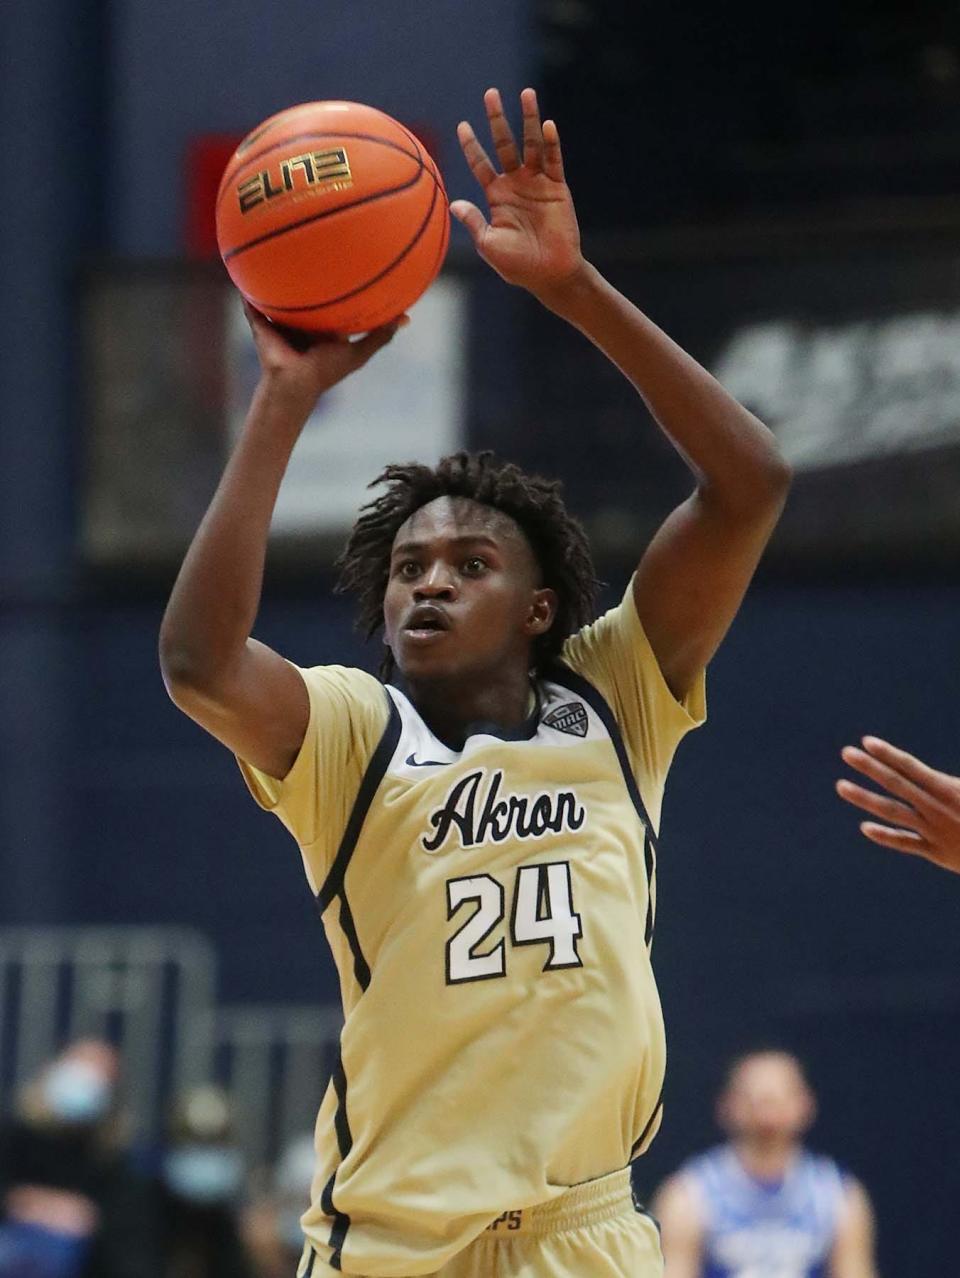 University of Akron sophomore Ali Ali said attention to detail and extra effort are keys to the team's eight-game winning streak heading into Thursday night's game against UCLA in the NCAA Tournament.